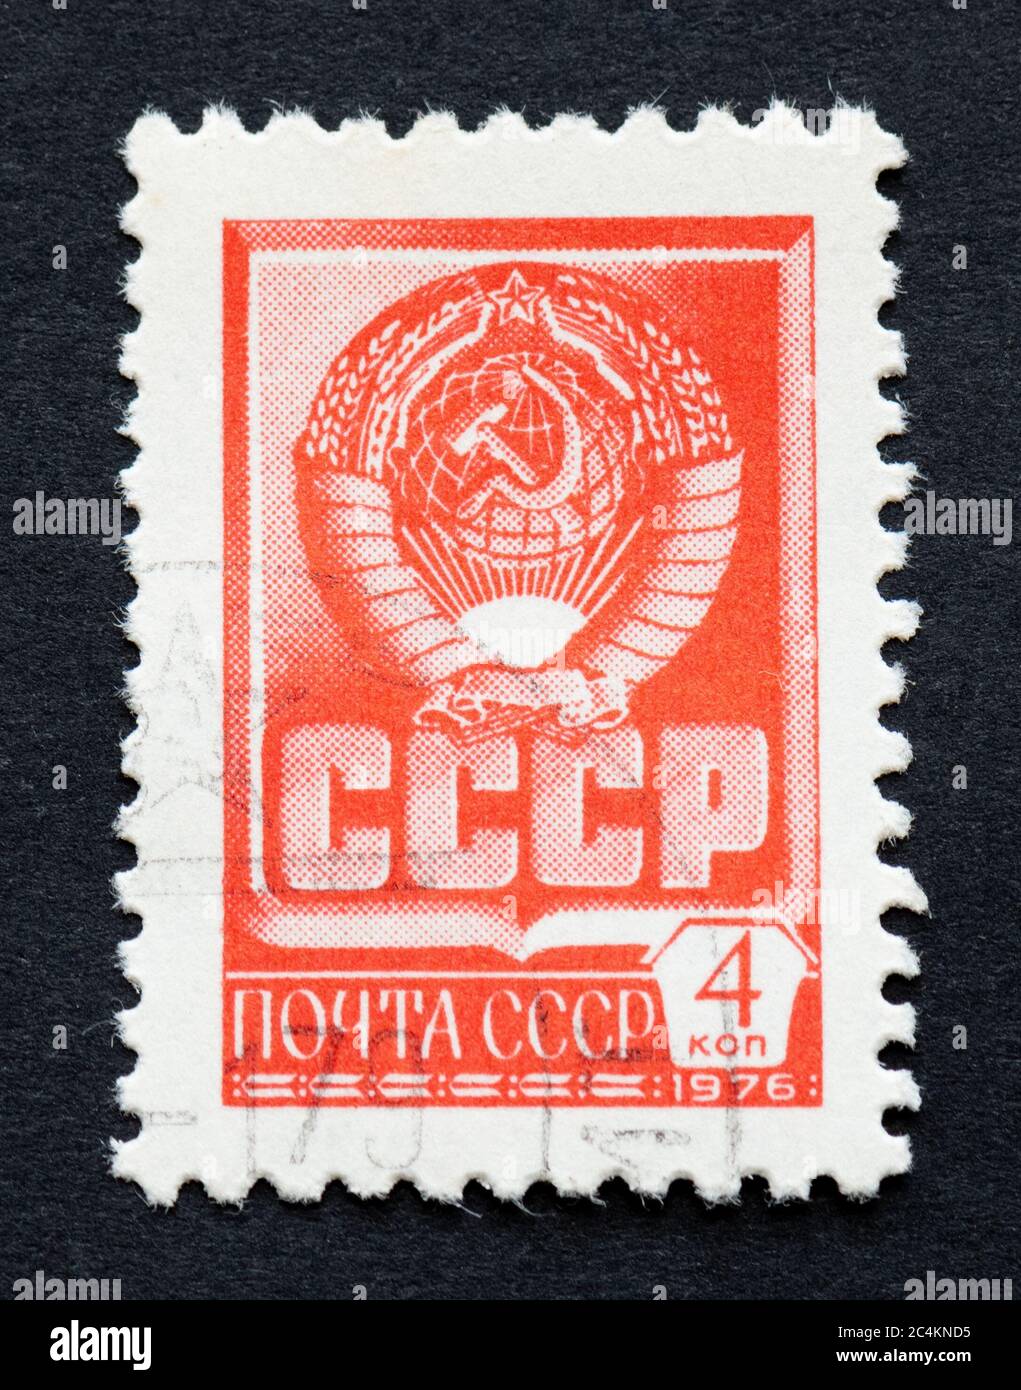 CCCP Soviet union postage stamp definitive issue no 12 Stock Photo